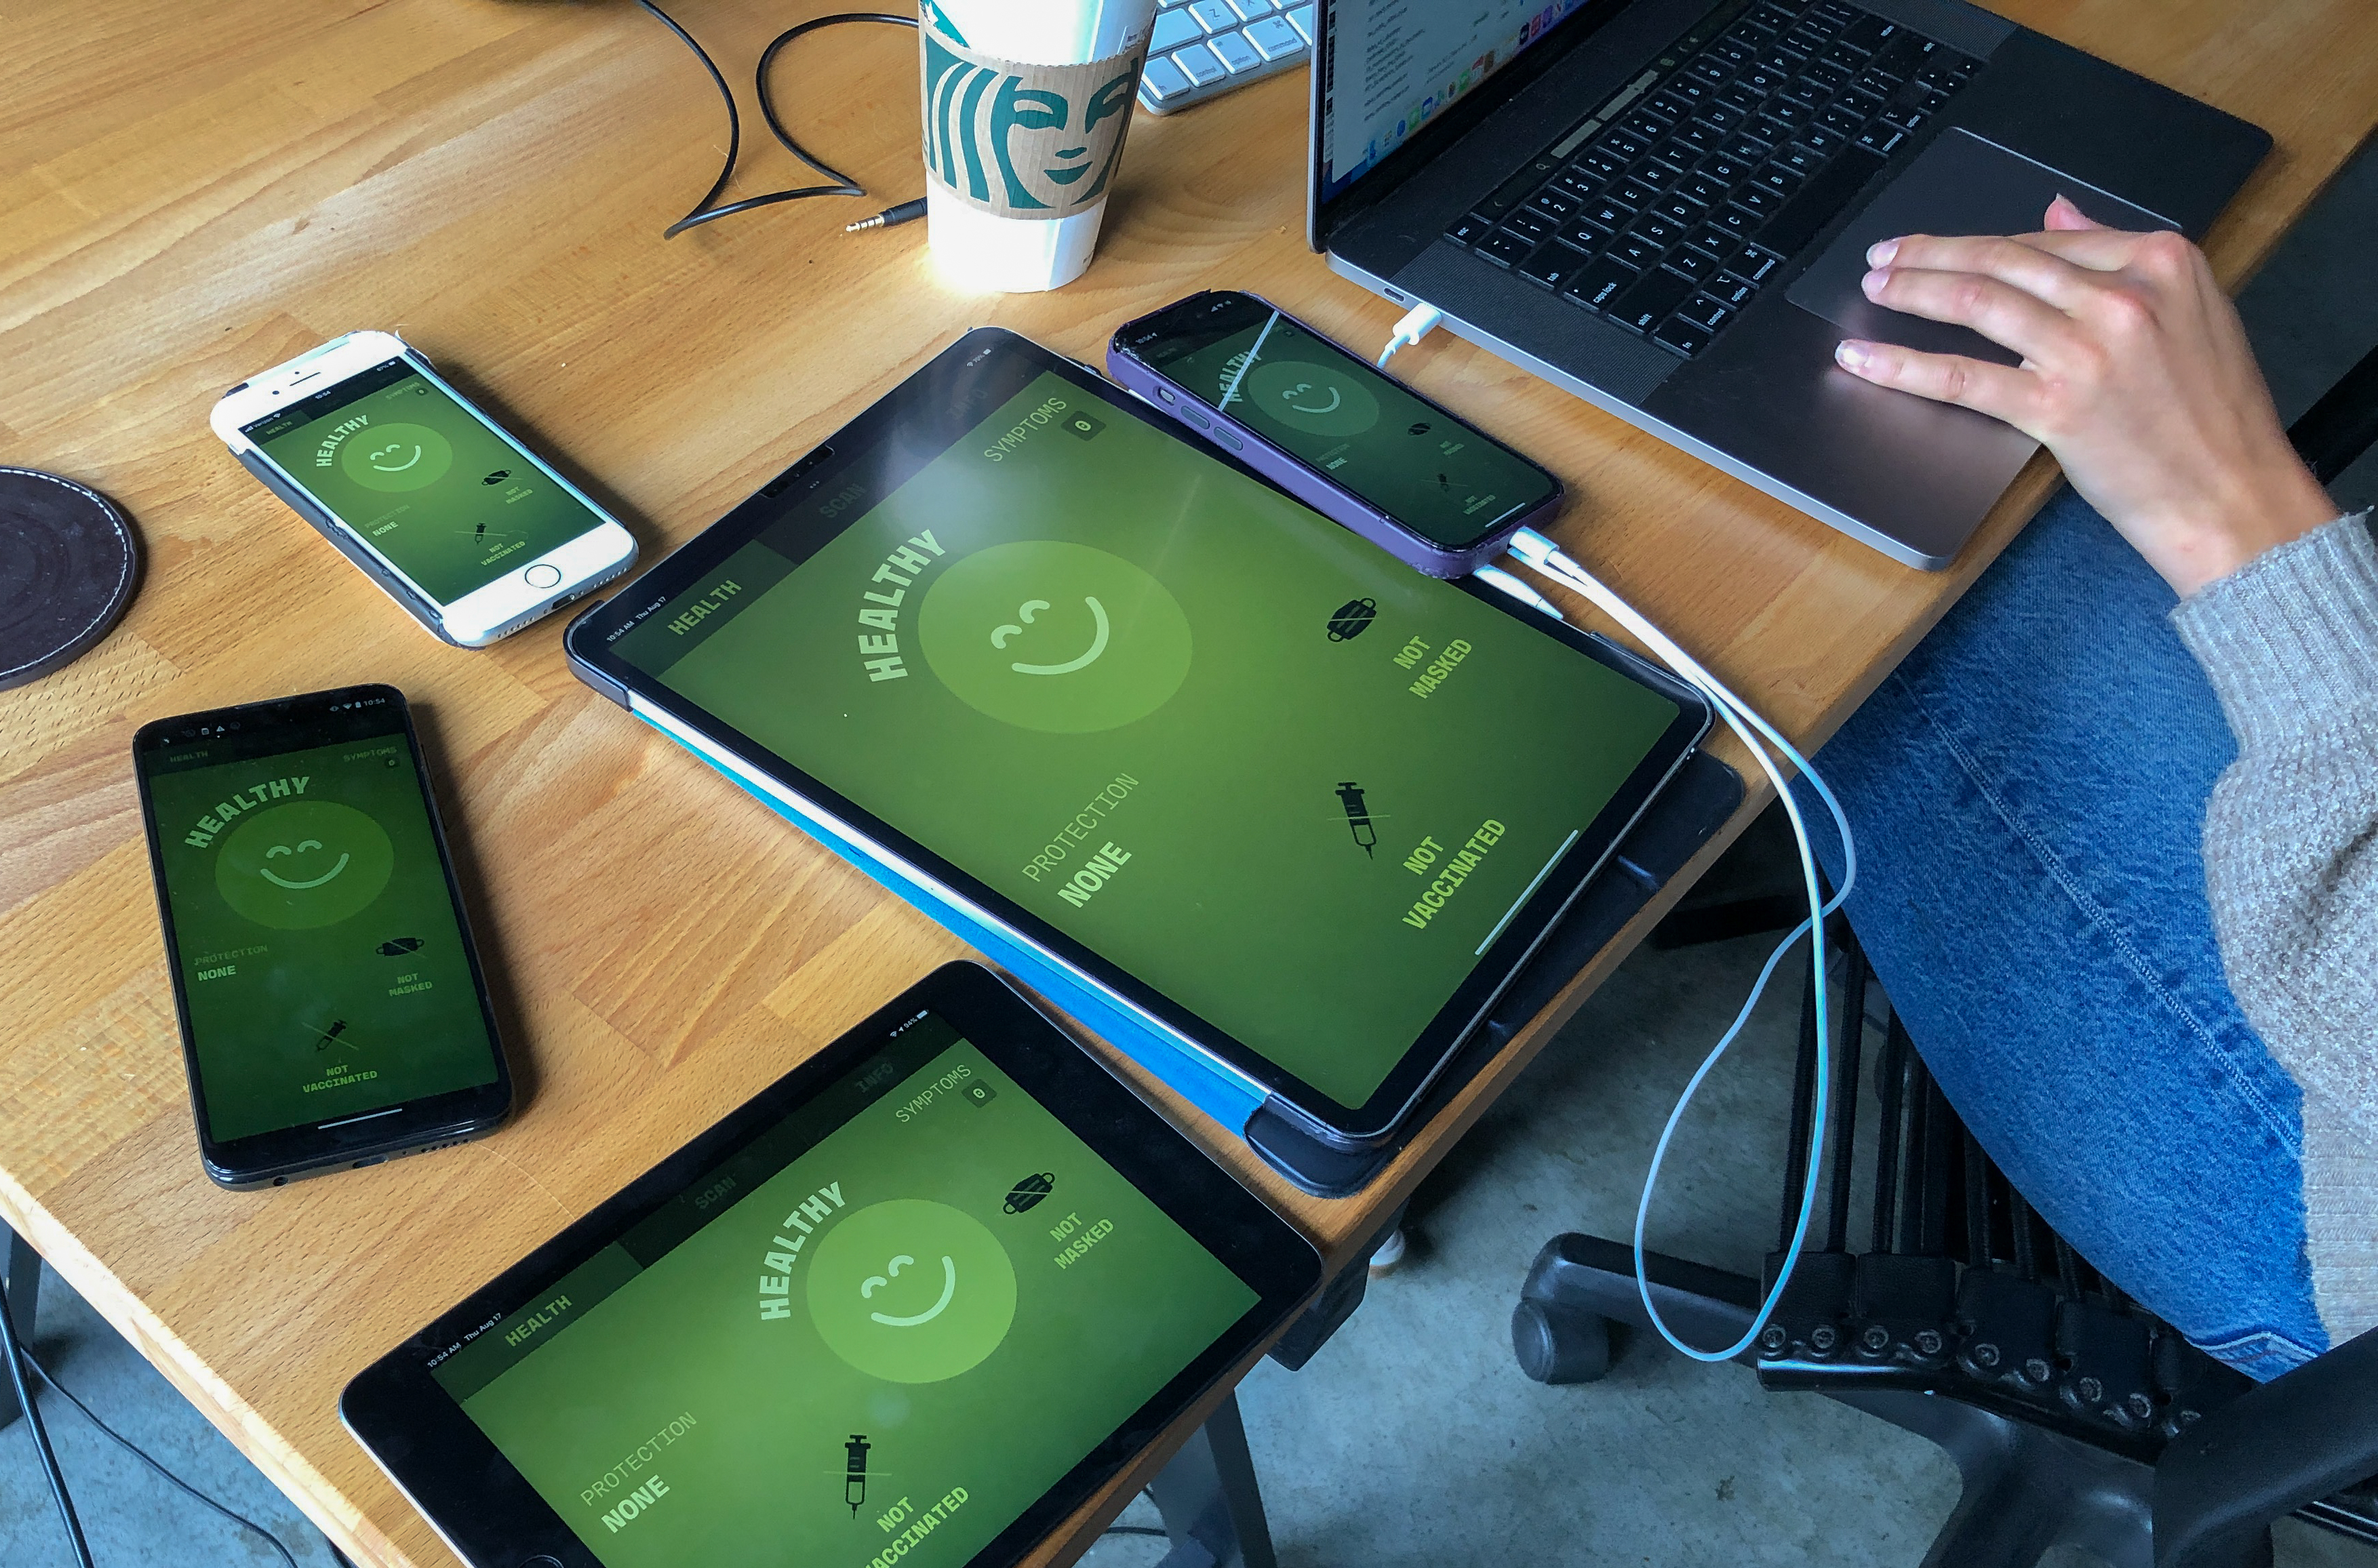 Five different devices all laid out on the desk, each showing the Operation Outbreak mobile screen. A smiley face on a green background represents the participant’s healthy status, and the screen also shows that the participant currently has no protection, is not vaccinated, and is not masked.